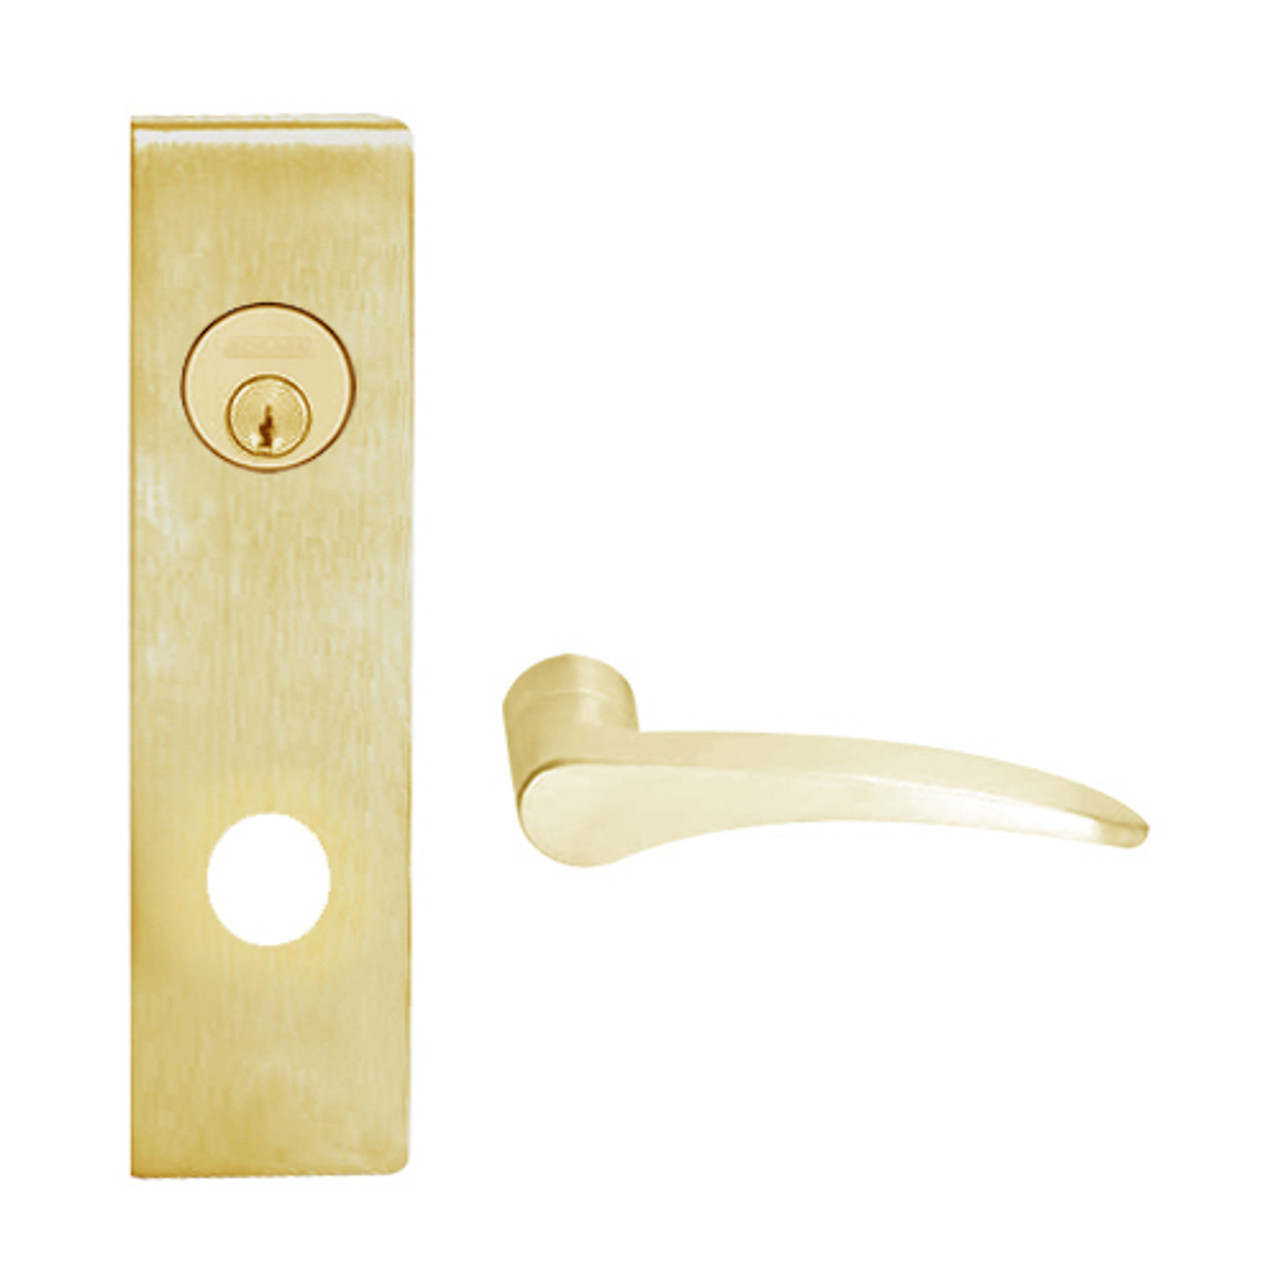 L9050P-12N-606-LH Schlage L Series Entrance Commercial Mortise Lock with 12 Cast Lever Design in Satin Brass